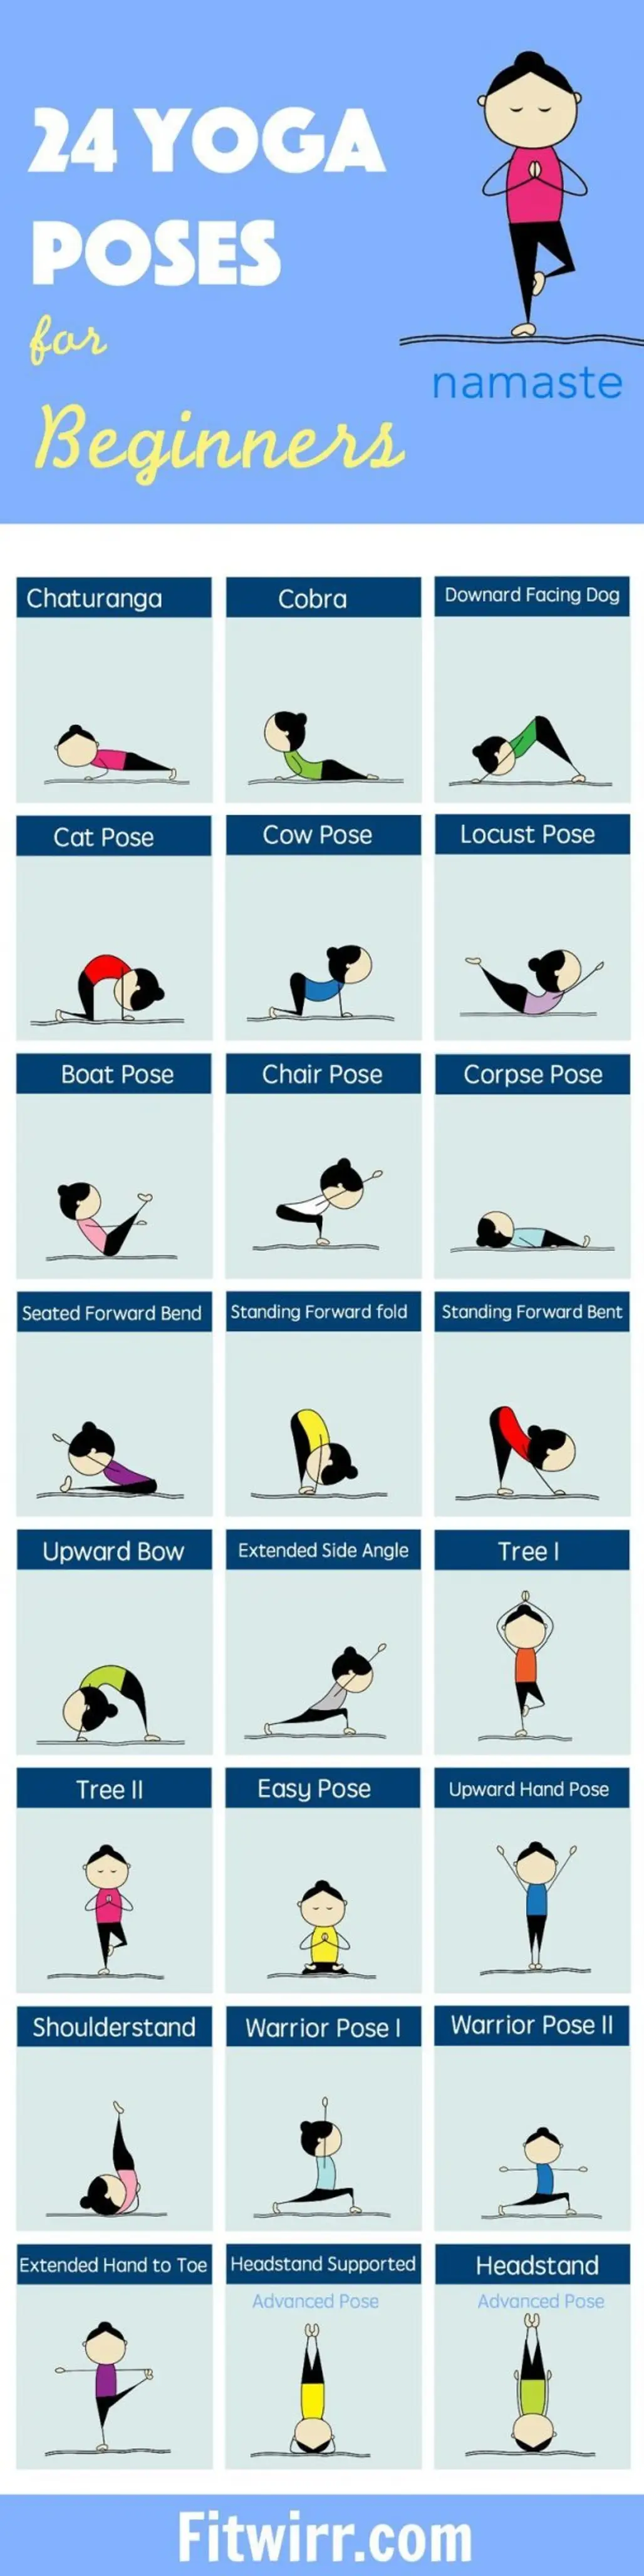 Understanding the Bikram Yoga Sequence: A Guide to Why and How to Practice  - YOGA PRACTICE